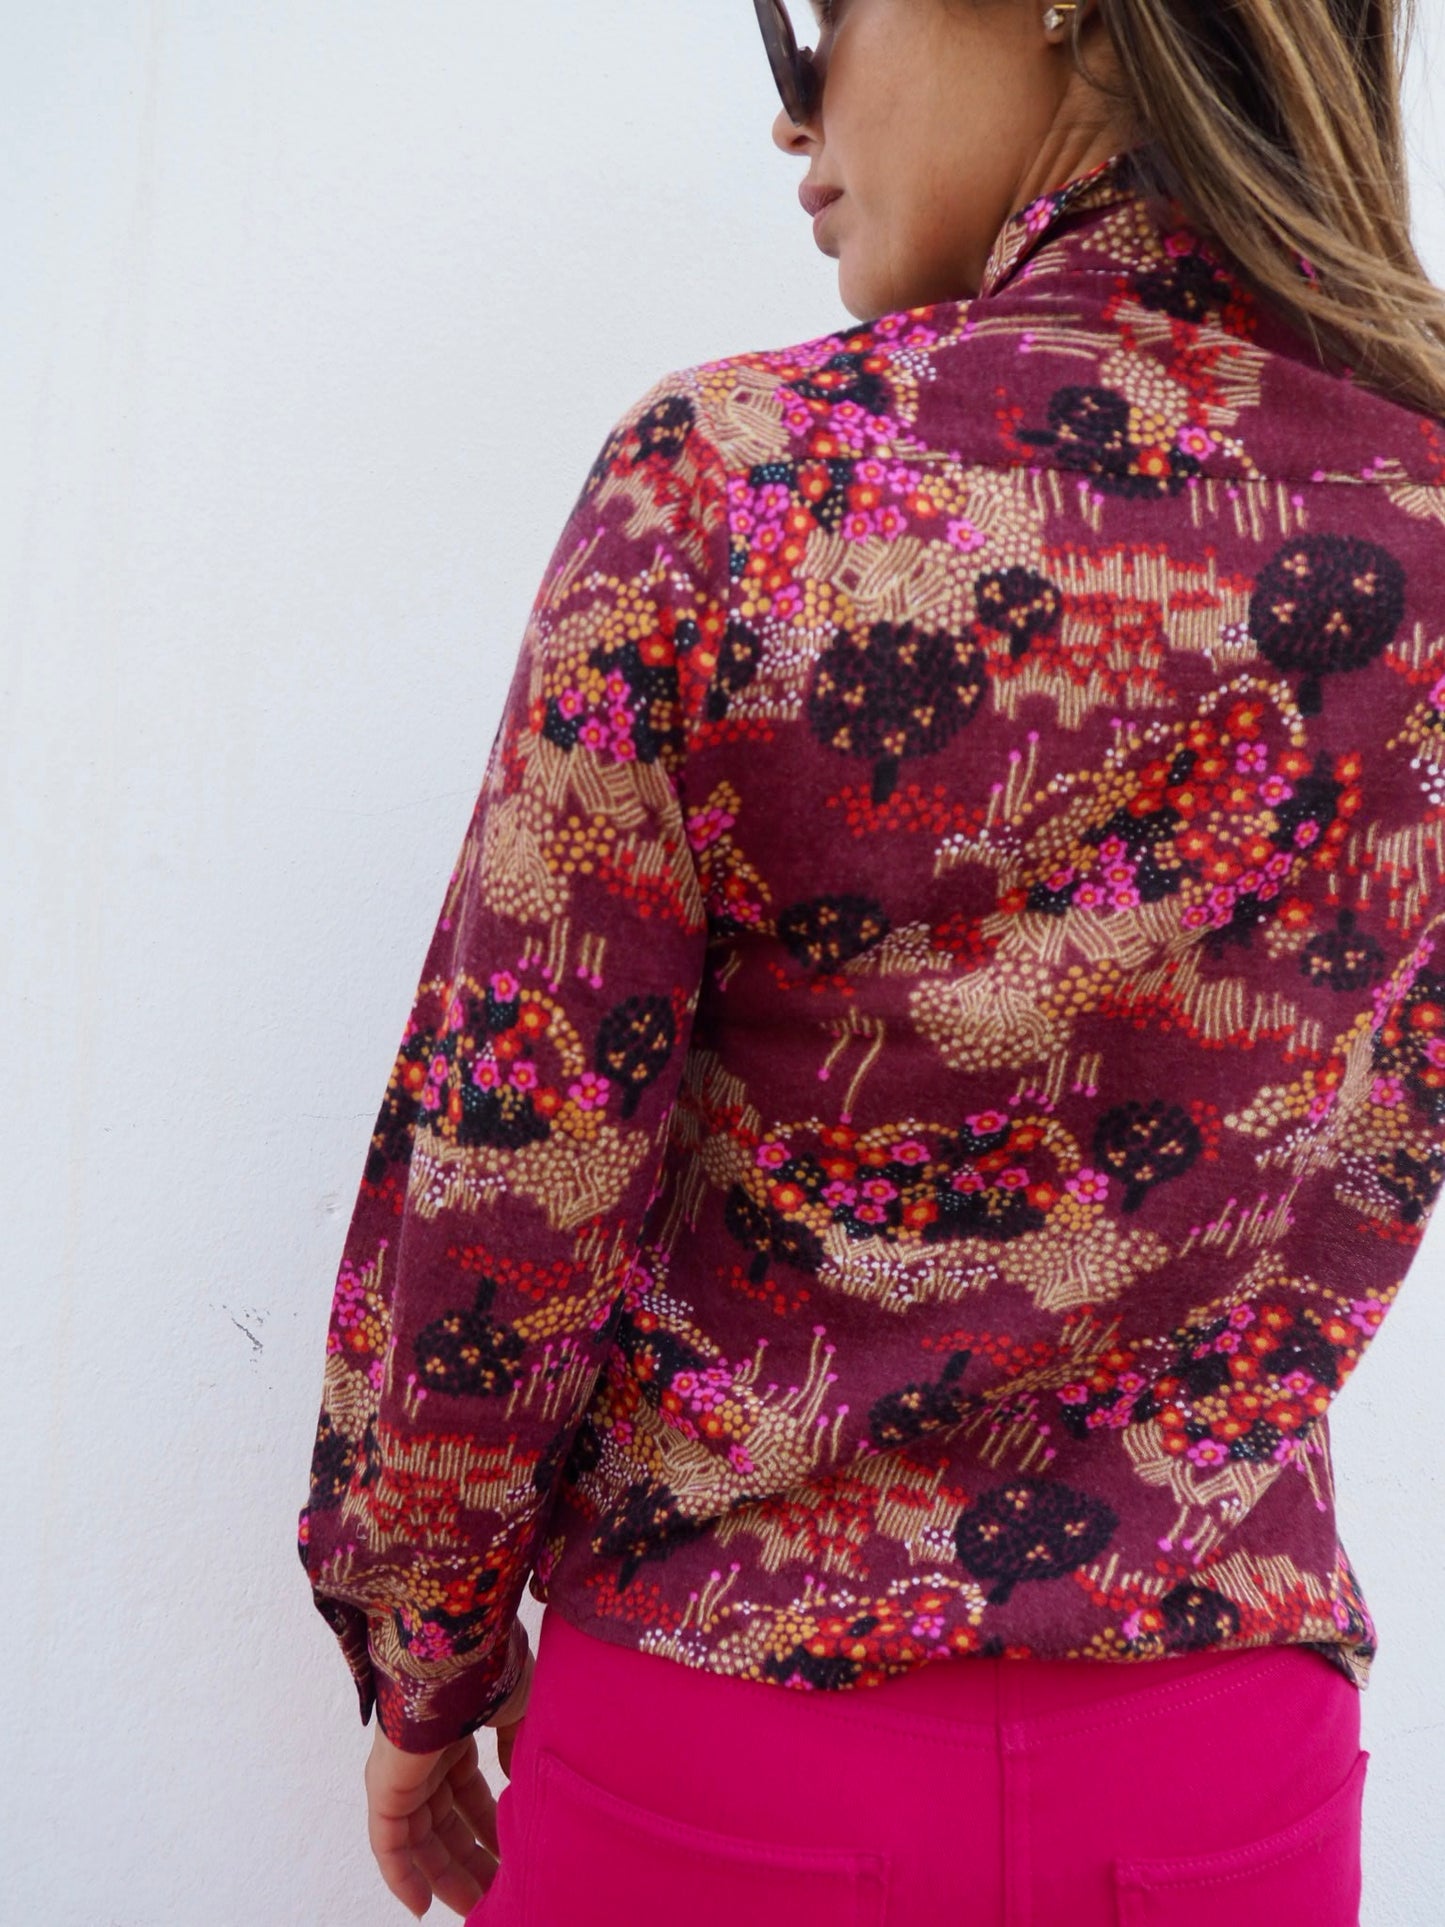 Original vintage 70’s cool printed pink and purple shirt made in man made fibres with a soft touch with oversize collars